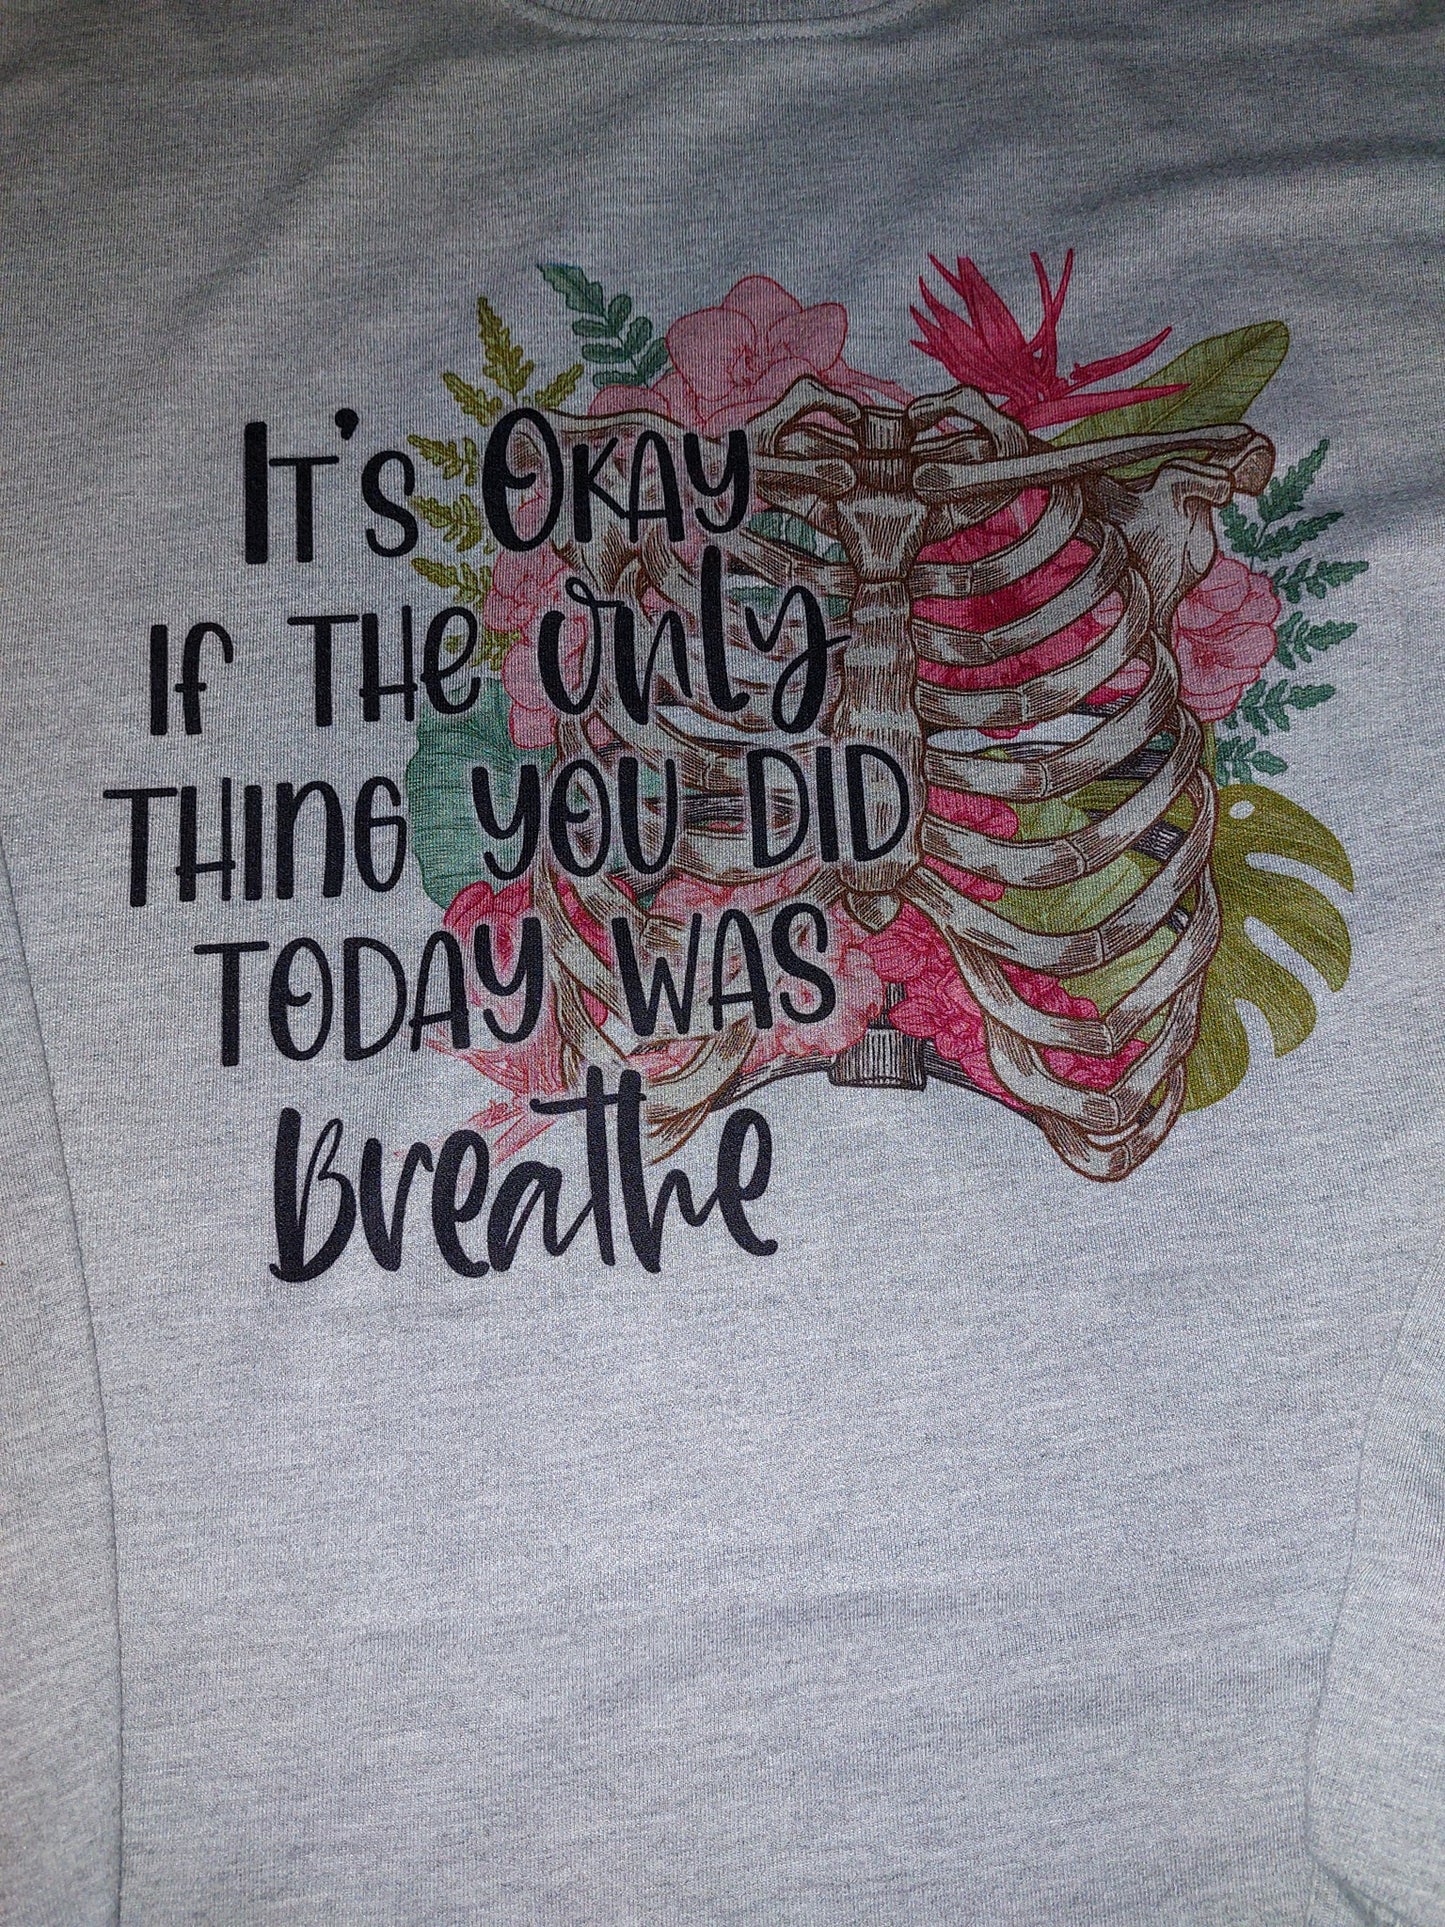 IT'S OKAY IF THE ONLY THING YOU DID TODAY WAS BREATH